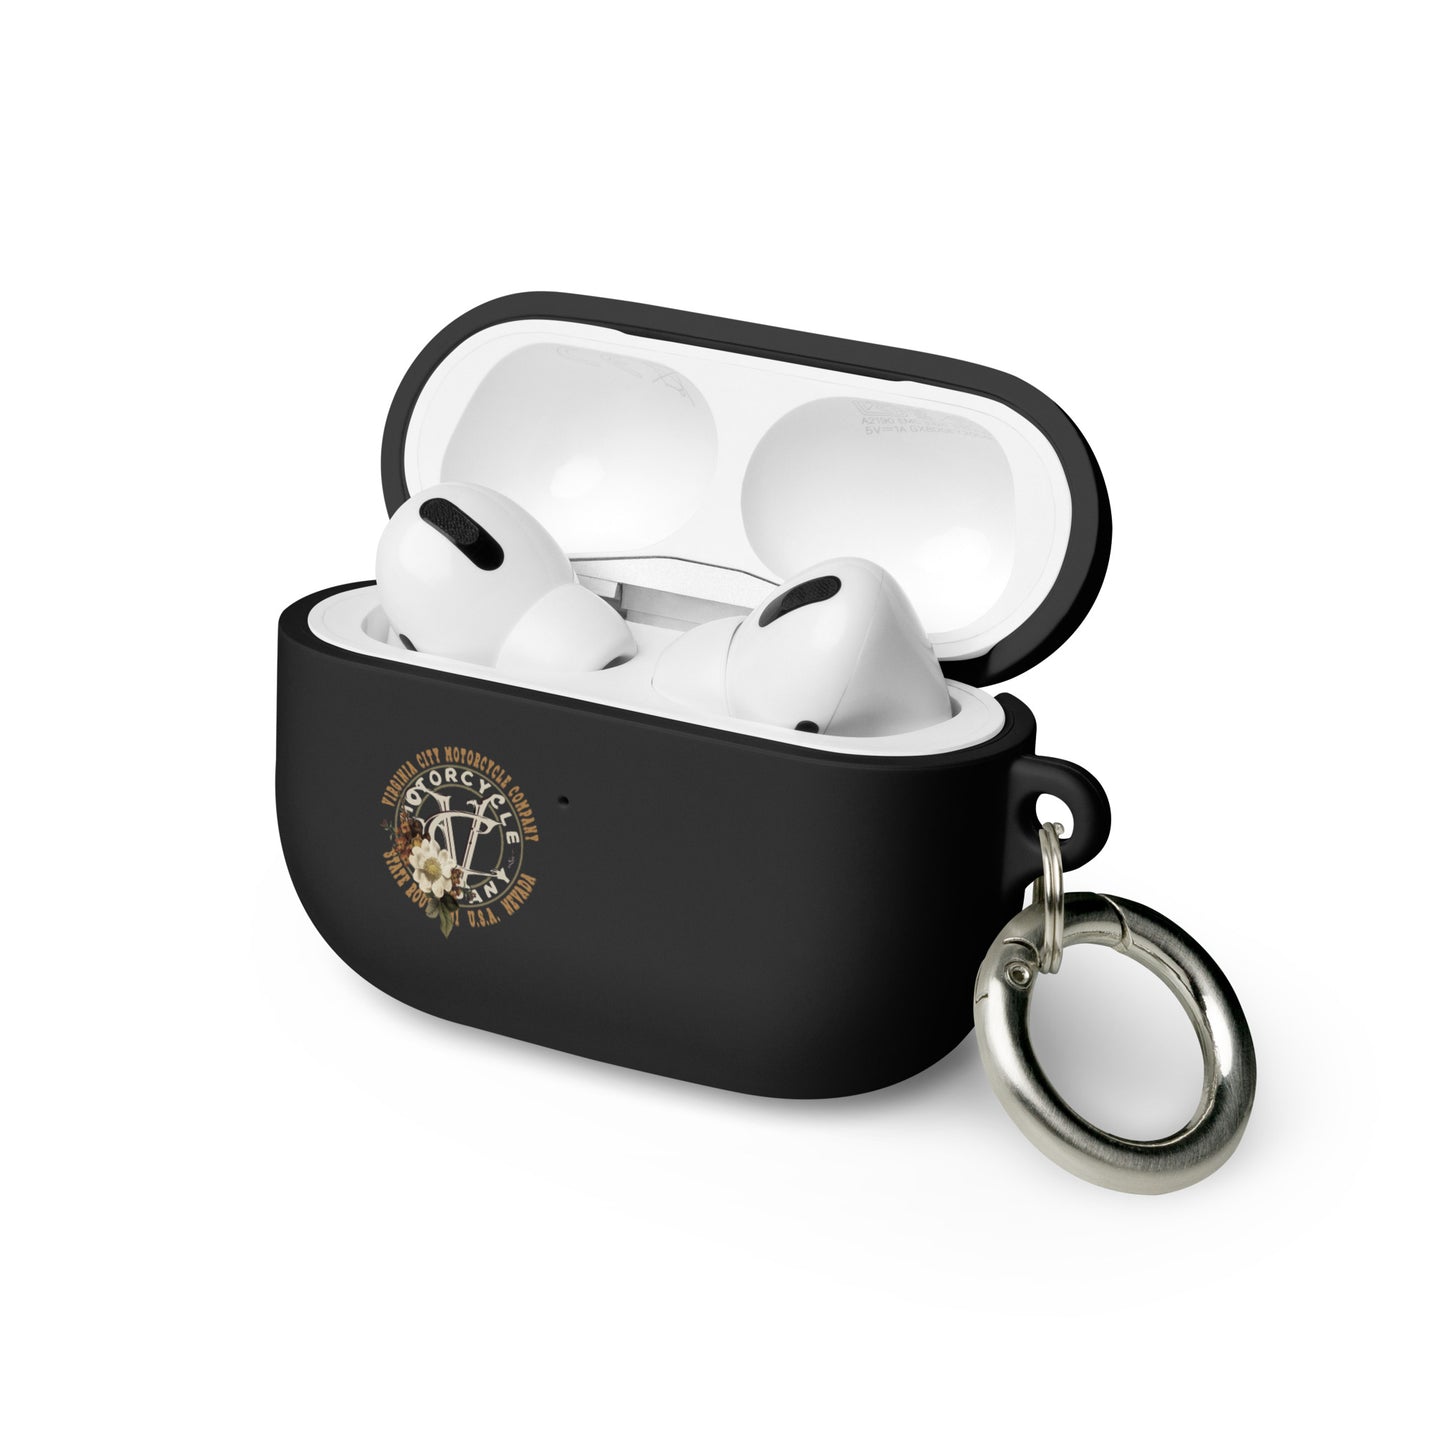 VC Motorcycle Company Logo AirPods case airpod case Virginia City Motorcycle Company Apparel 